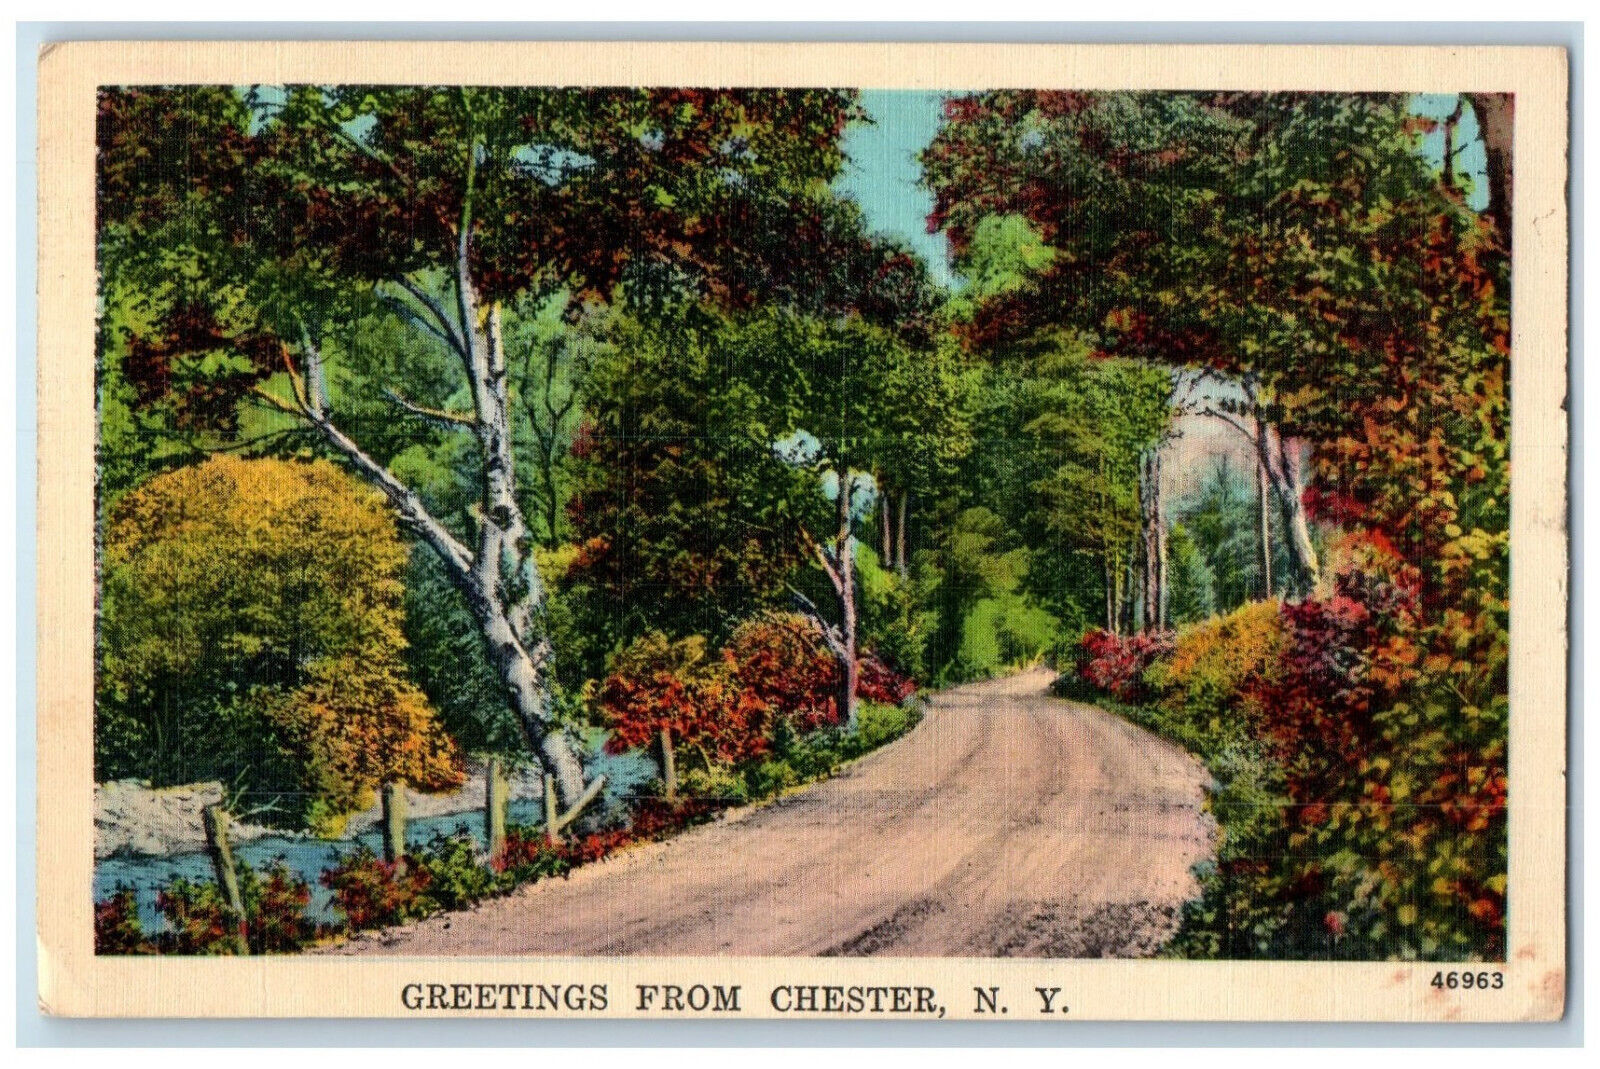 1948 Road Scene Greetings from Chester New York NY Posted Vintage Postcard